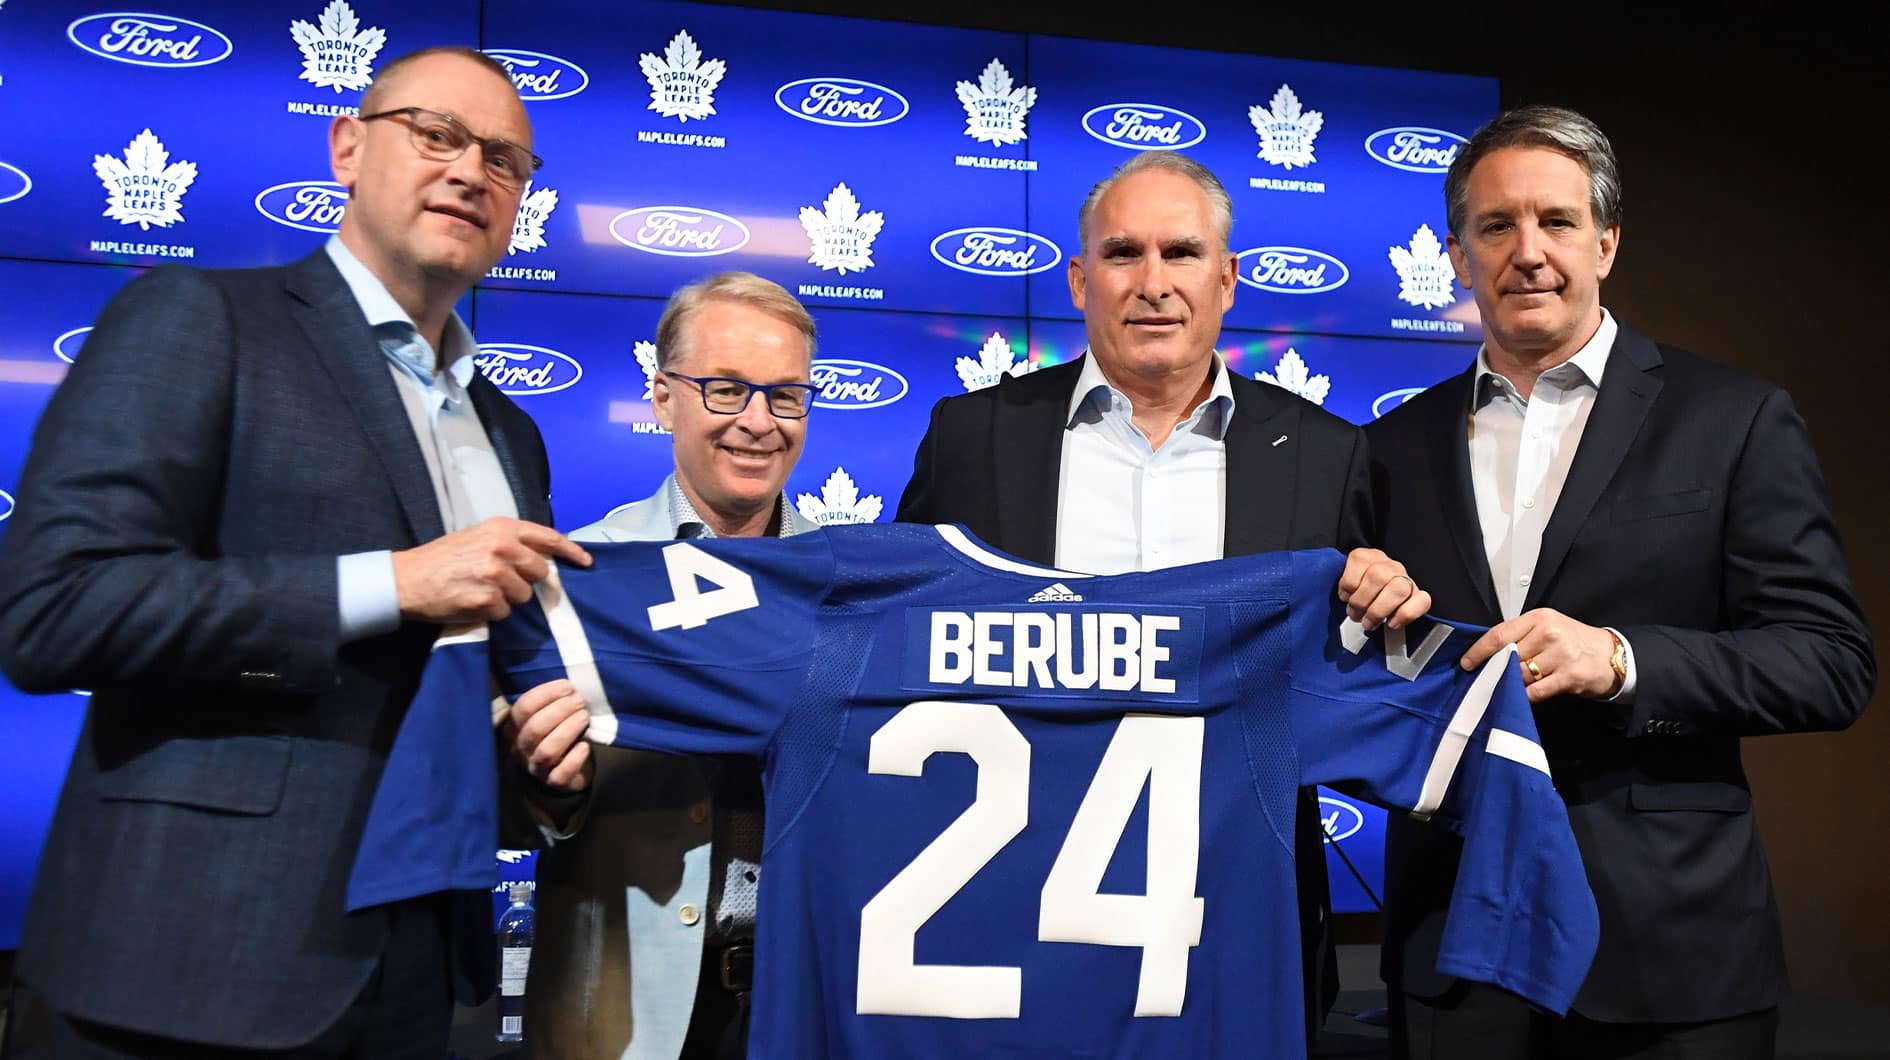 Newly appointed Toronto Maple Leafs head coach Craig Berube (second right) poses with a team jersey alongside (from left) general manager Brad Treliving, Maple Leaf Sport and Entertainment president Keith Pelley and club president Brendan Shanahan at Ford Performance Centre